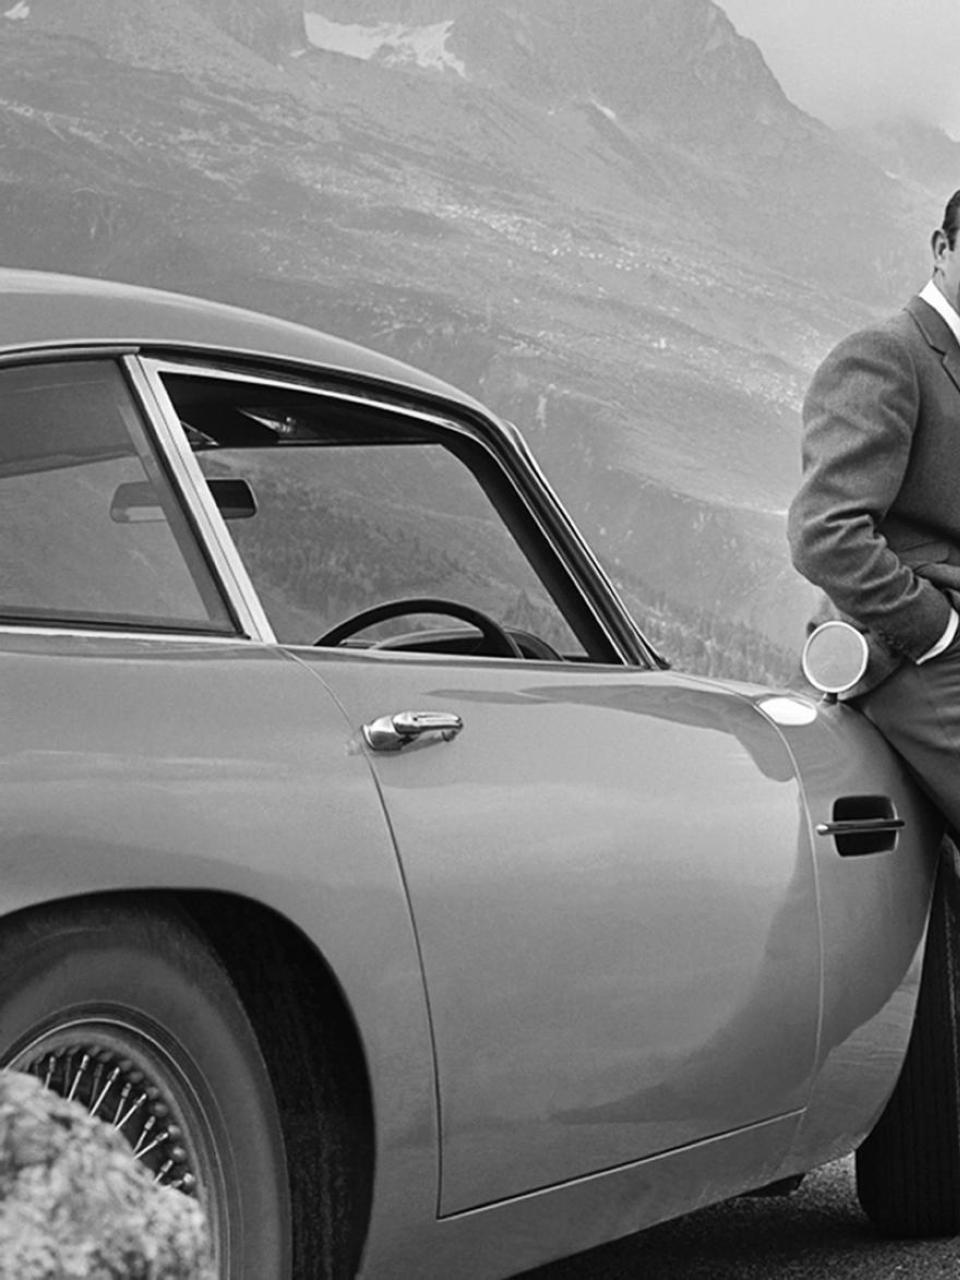 James Bond aka 007 on his quest to hunt down Goldfinger in his Aston Martin DB5 in Switzerland.